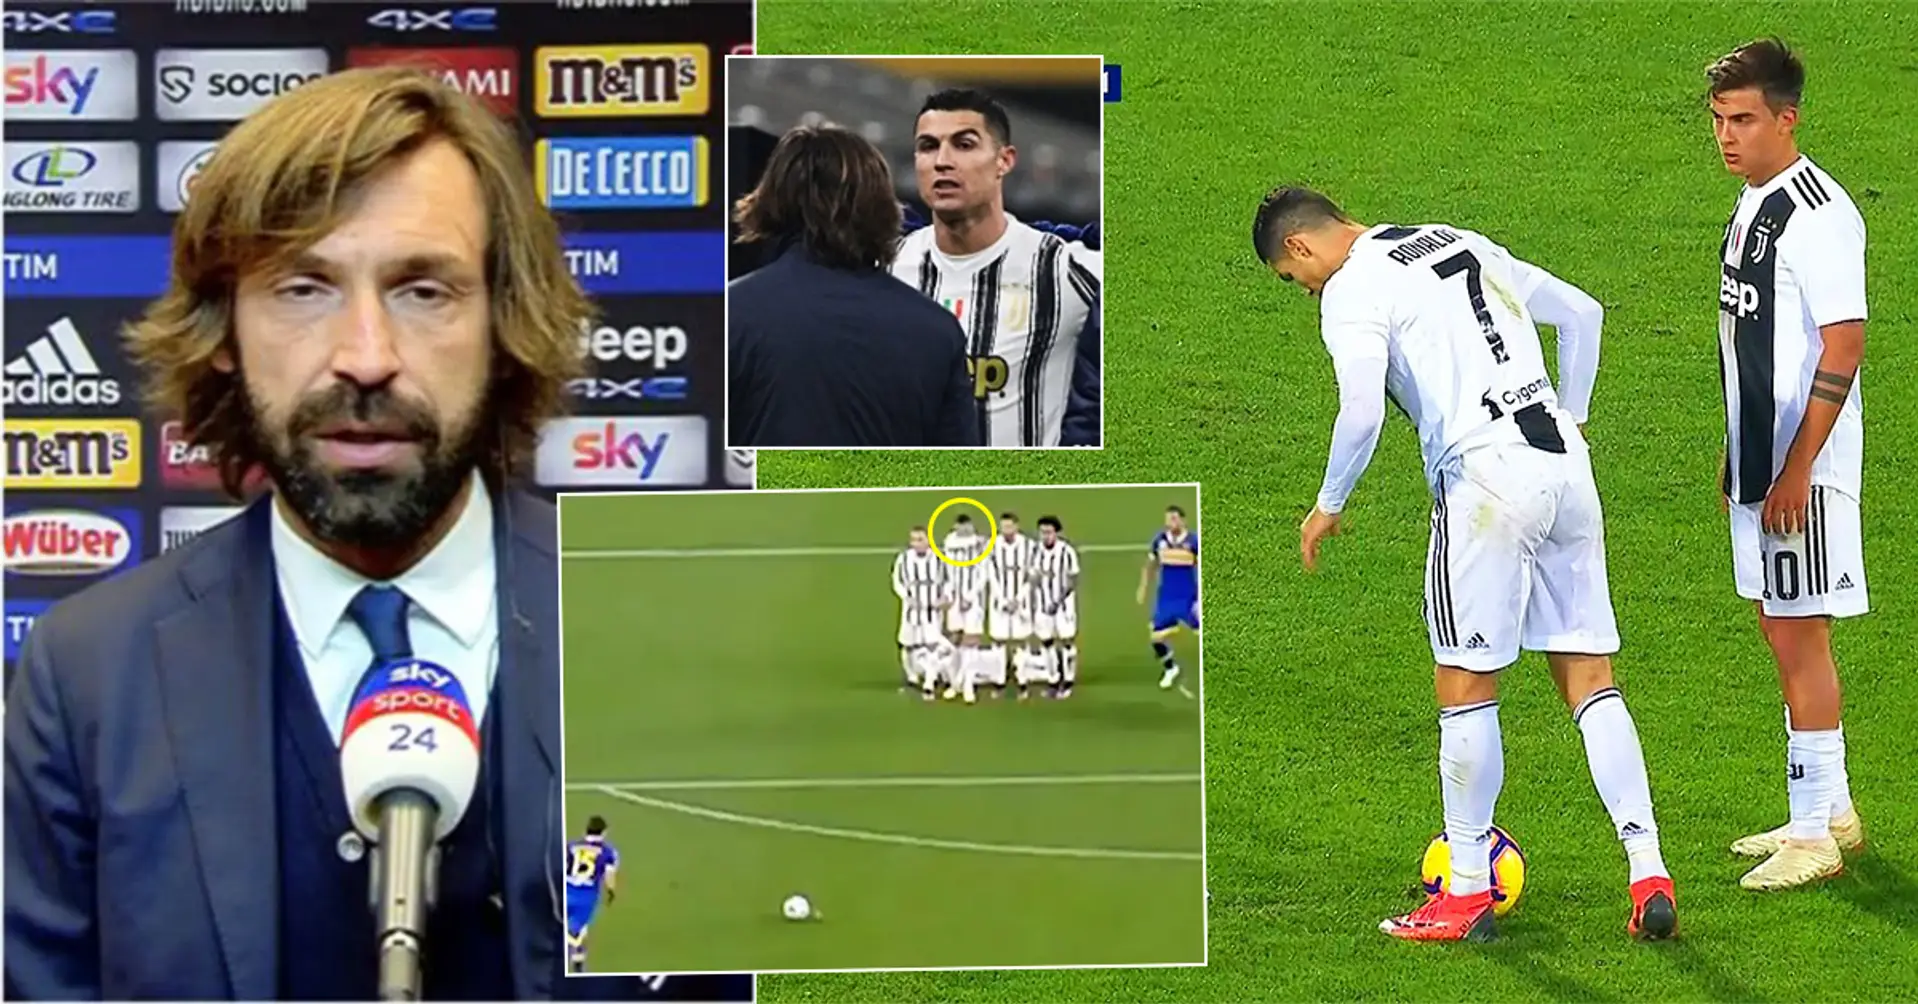 Andrea Pirlo sends a warning to Cristiano Ronaldo after his dangerous behaviour during free-kick